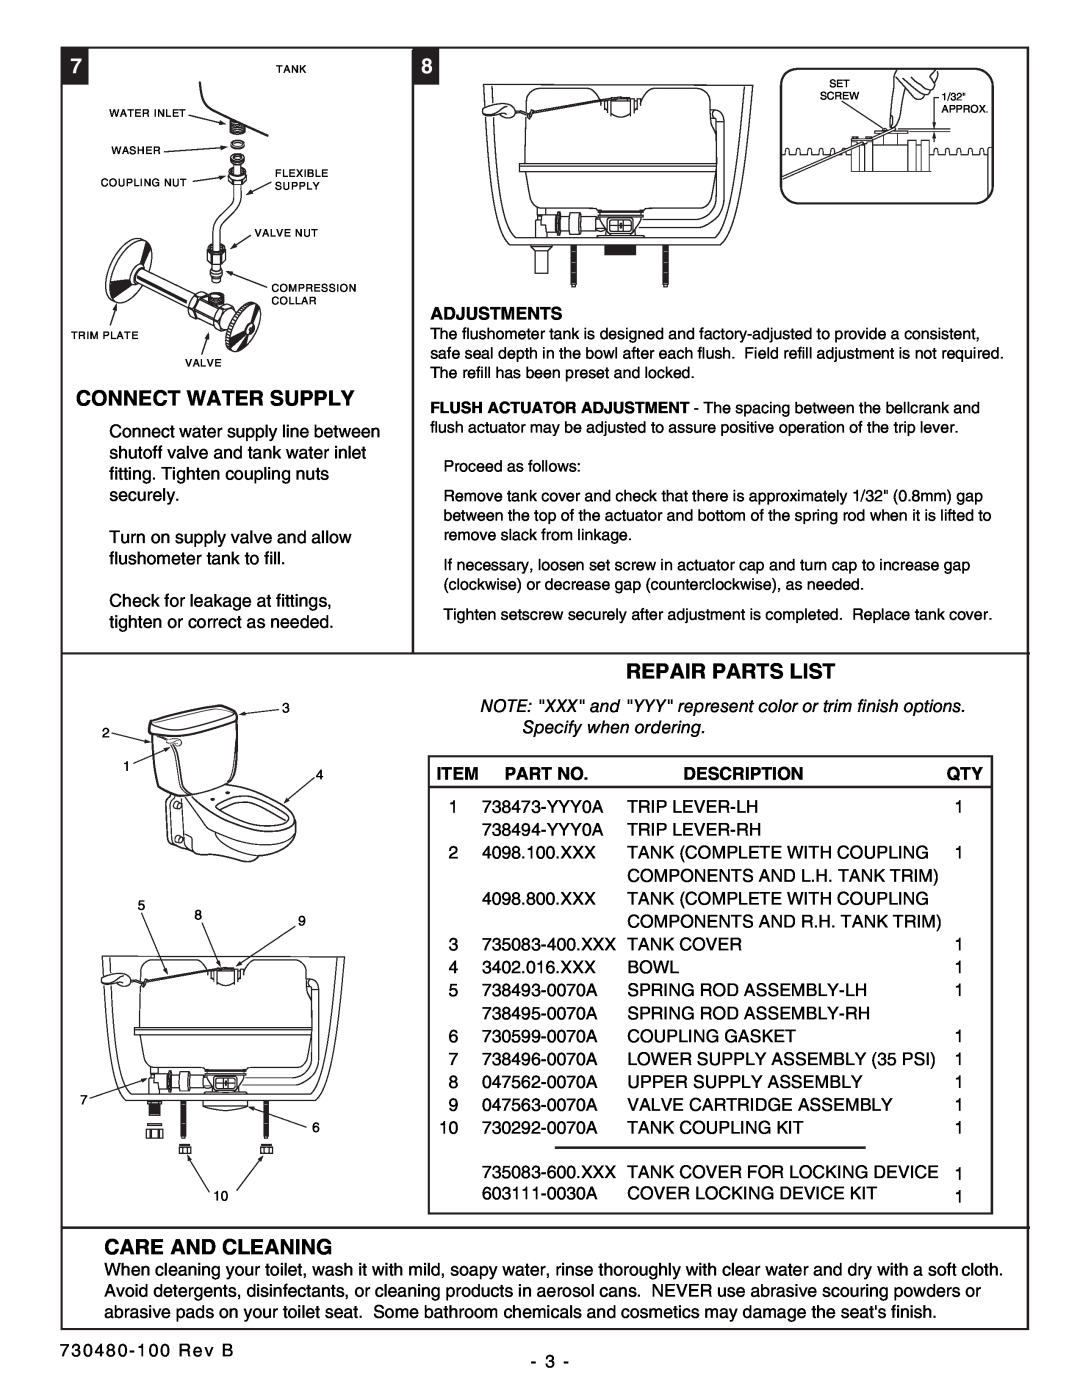 American Standard 2093 Elongated Connect Water Supply, Repair Parts List, Care And Cleaning, Adjustments, Description 